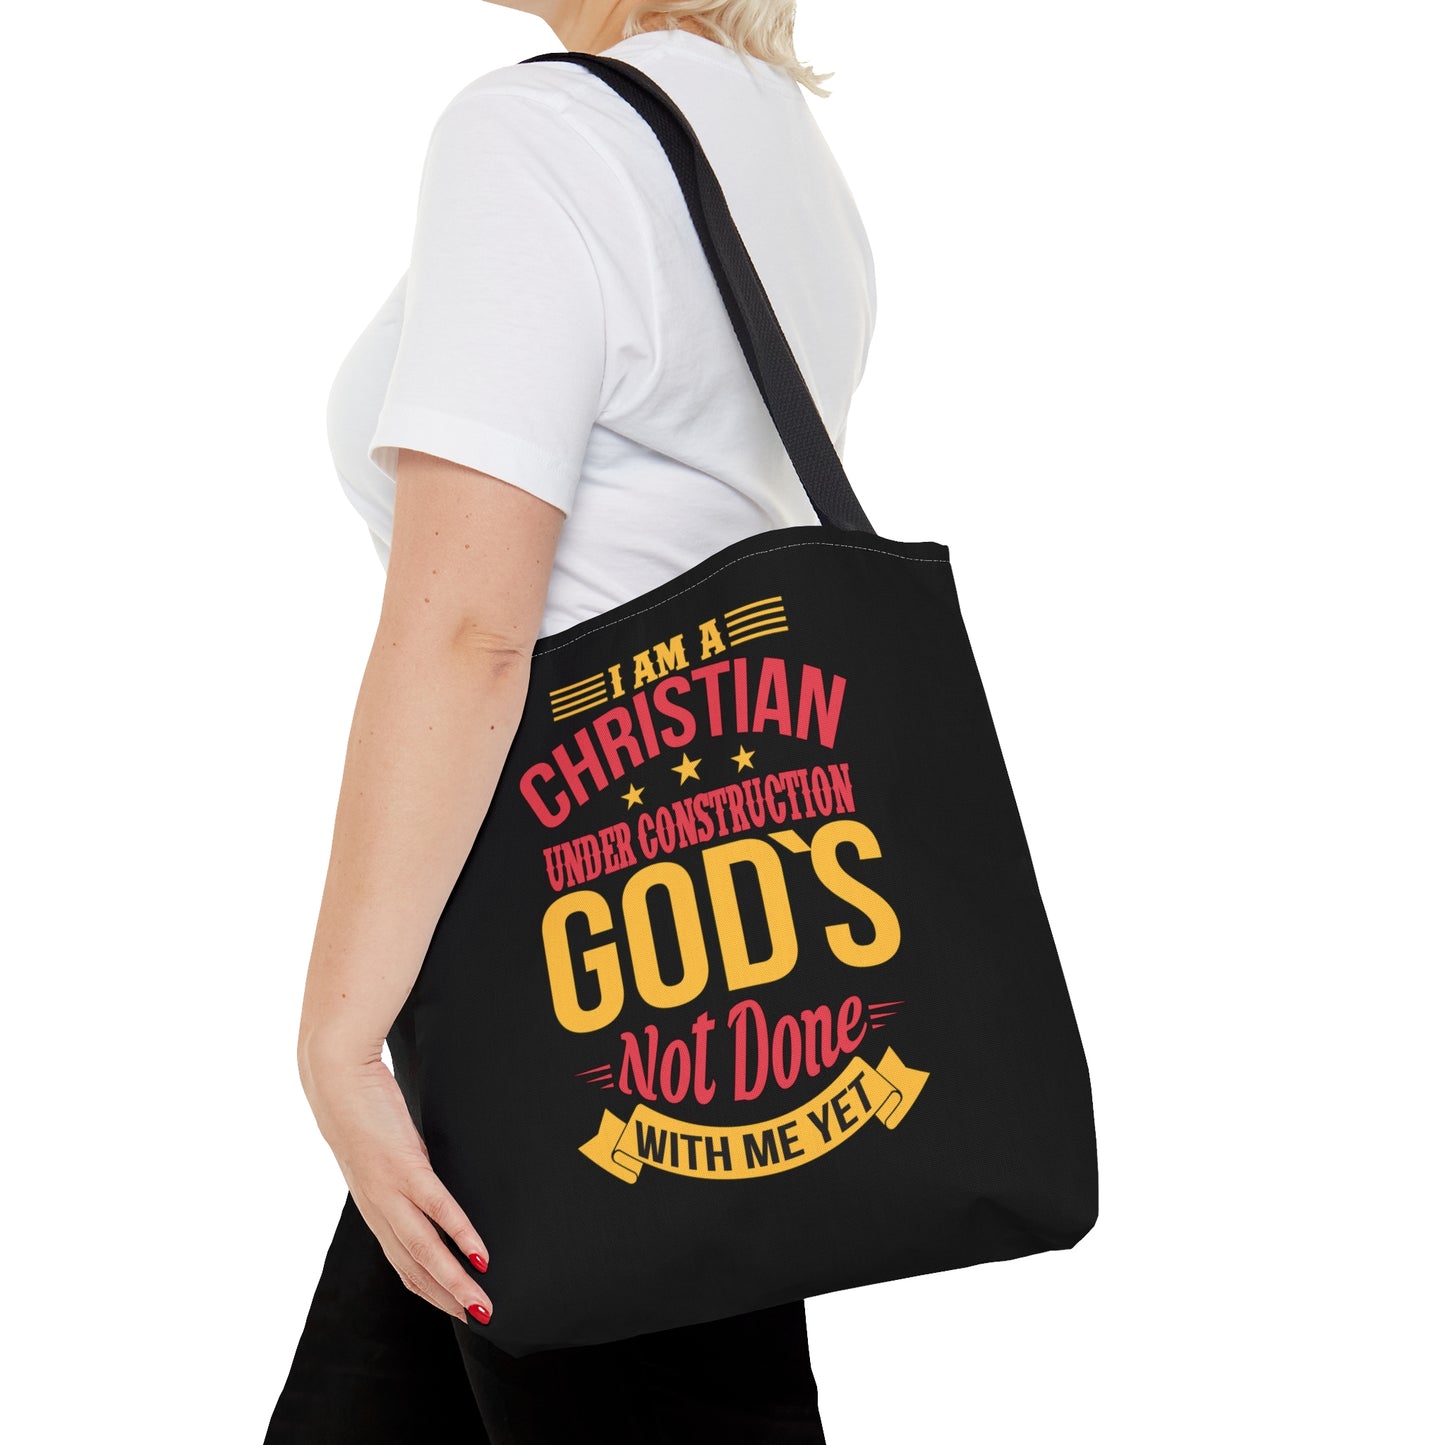 I'm A Christian Under Construction God's Not Done With Me Yet Christian Tote Bag Printify